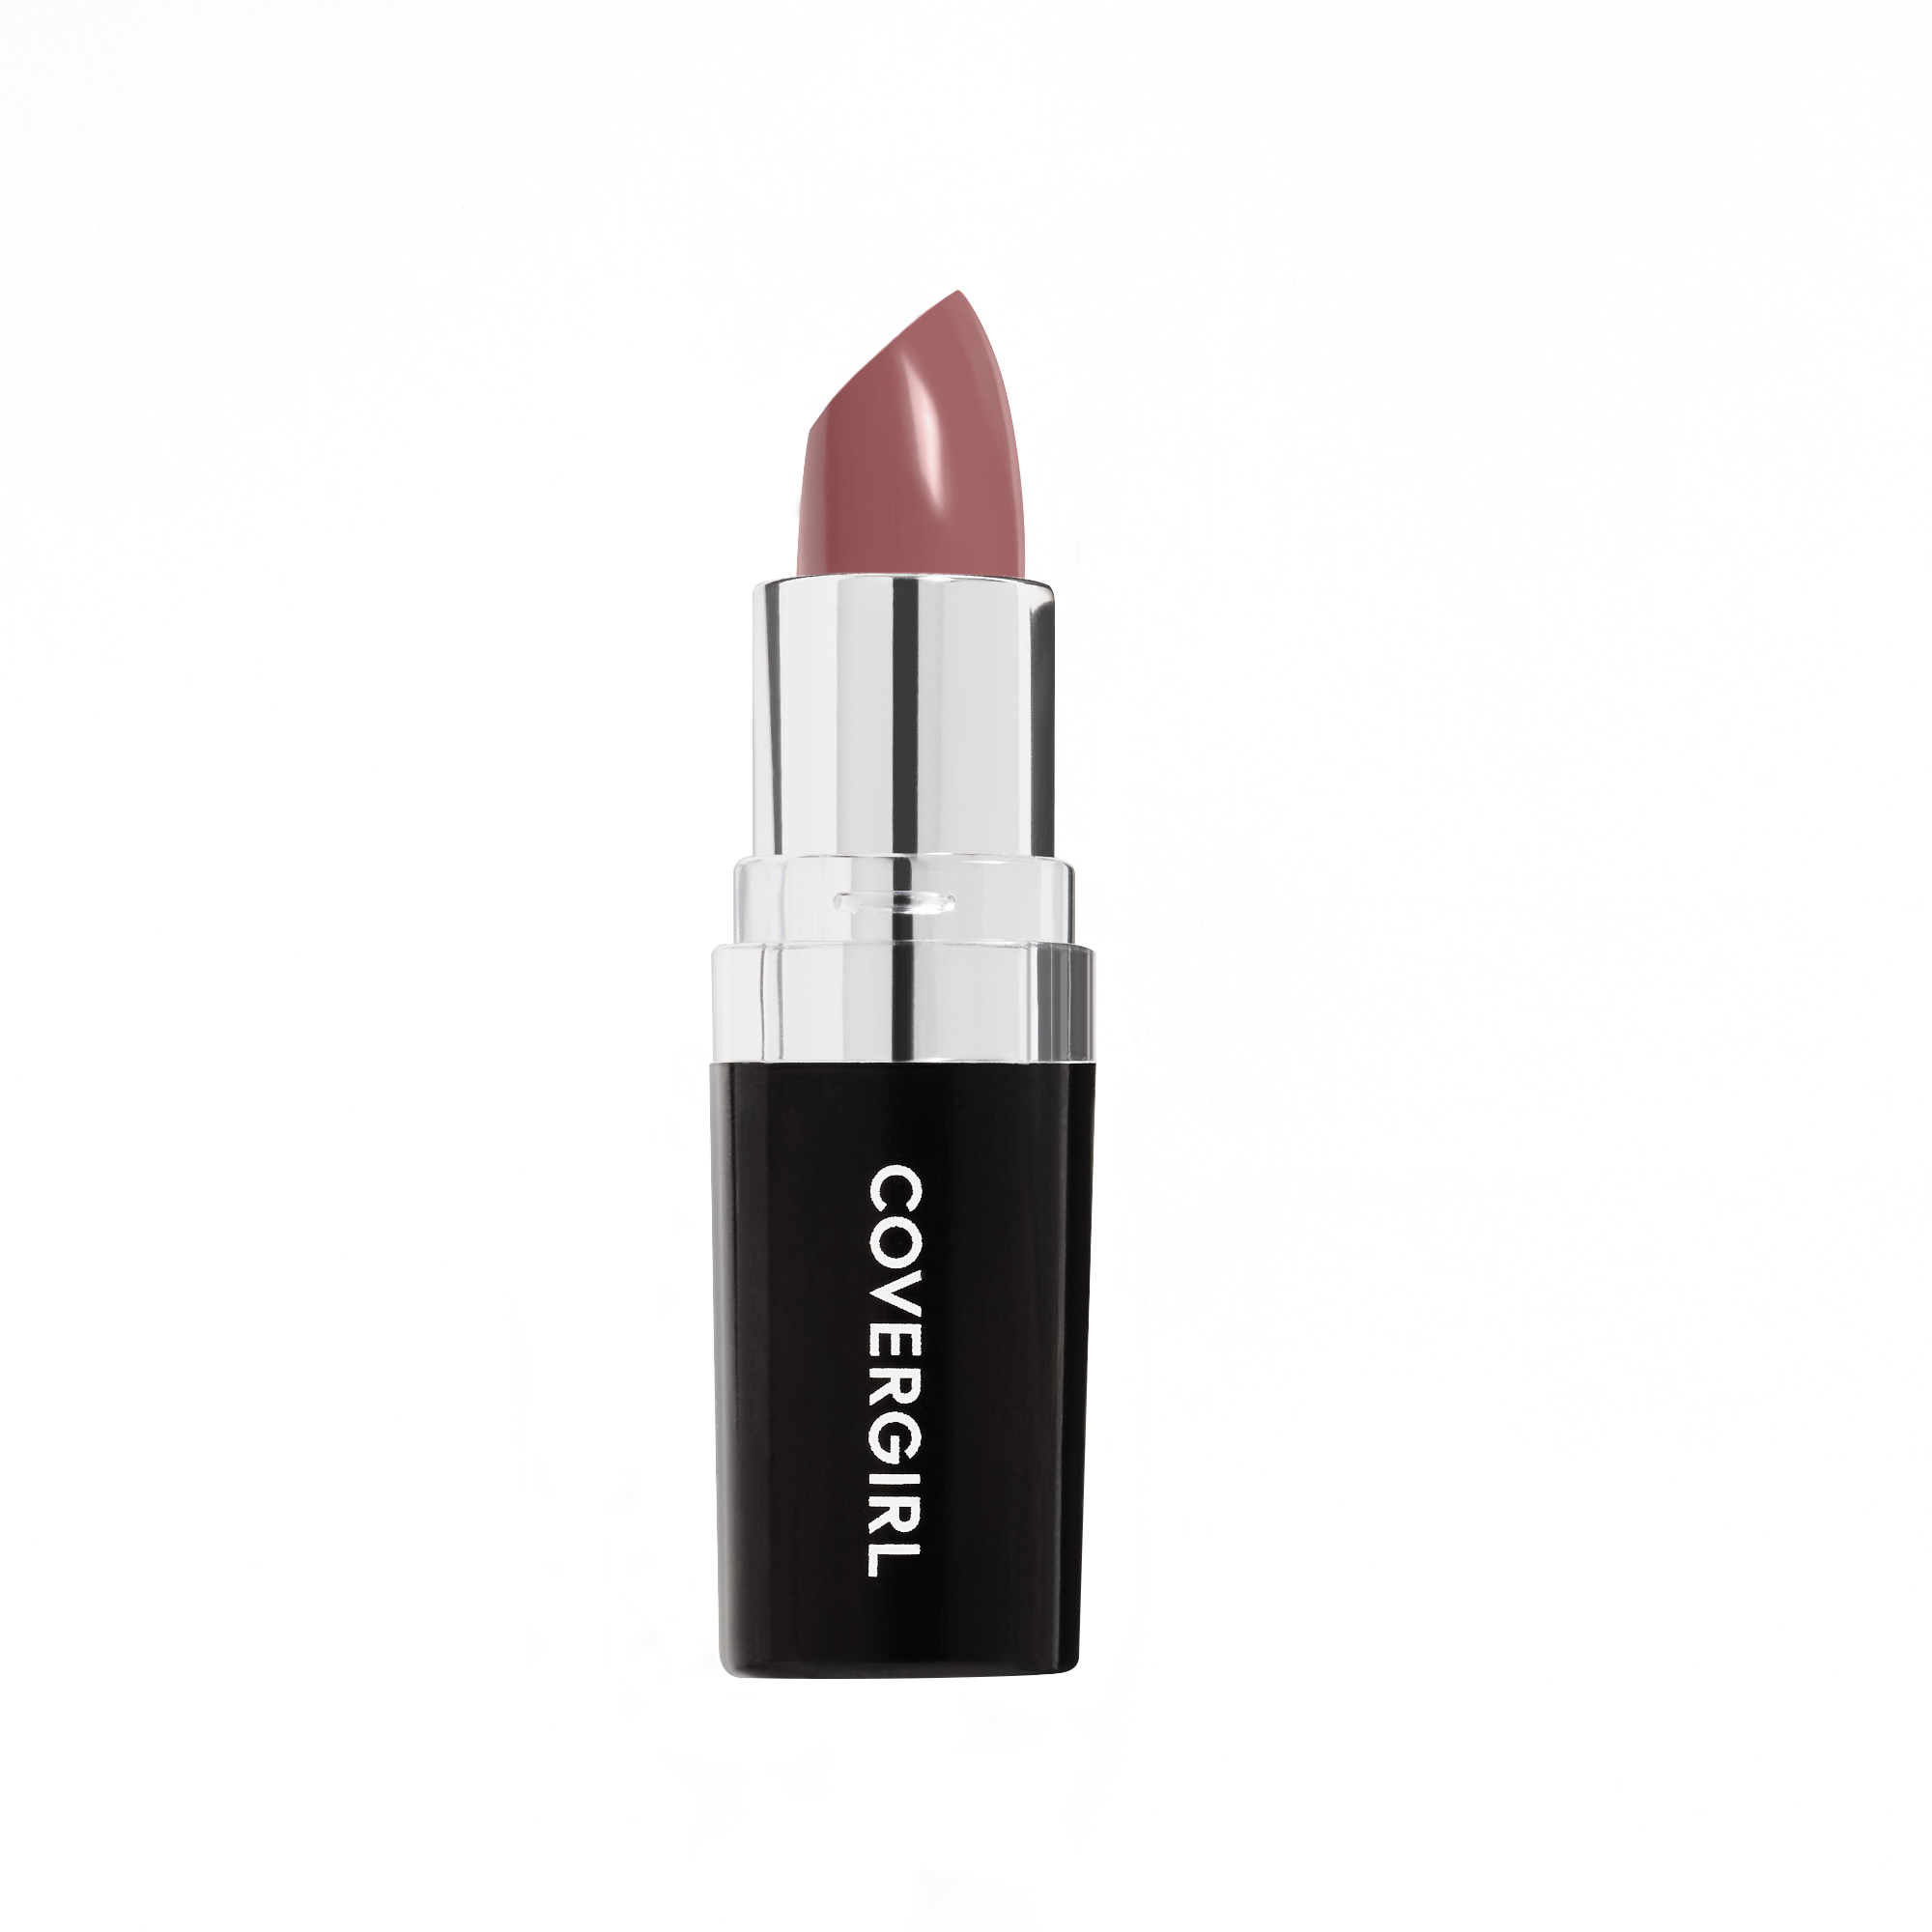 COVERGIRL Continuous Color Lipstick, 430 Bistro Burgundy, 0.13 oz, Moisturizing Lipstick, Long Lasting Lipstick, Extended Palette of Shades, Keeps Lips Soft - image 1 of 5